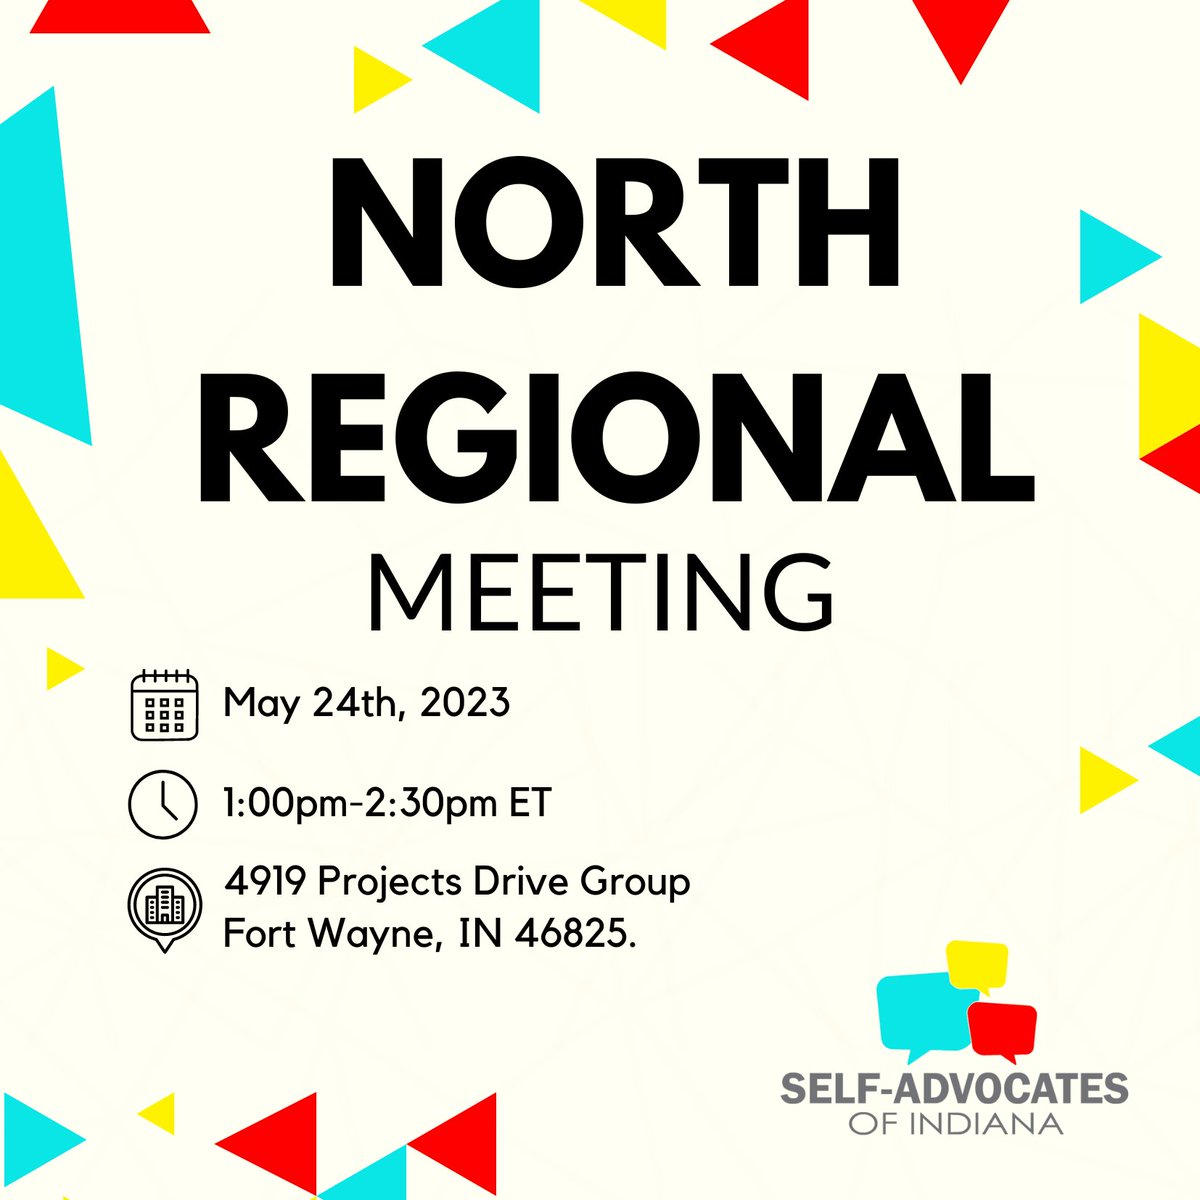 This Wednesday, May 24th will be our North Regional Meeting! Join us at @EastersealsArc  from 1pm-2:30pm ET to hear about what we have accomplished in the past year and share what your chapter has done!

#RegionalMeetings #SelfAdvocatesOfIndiana